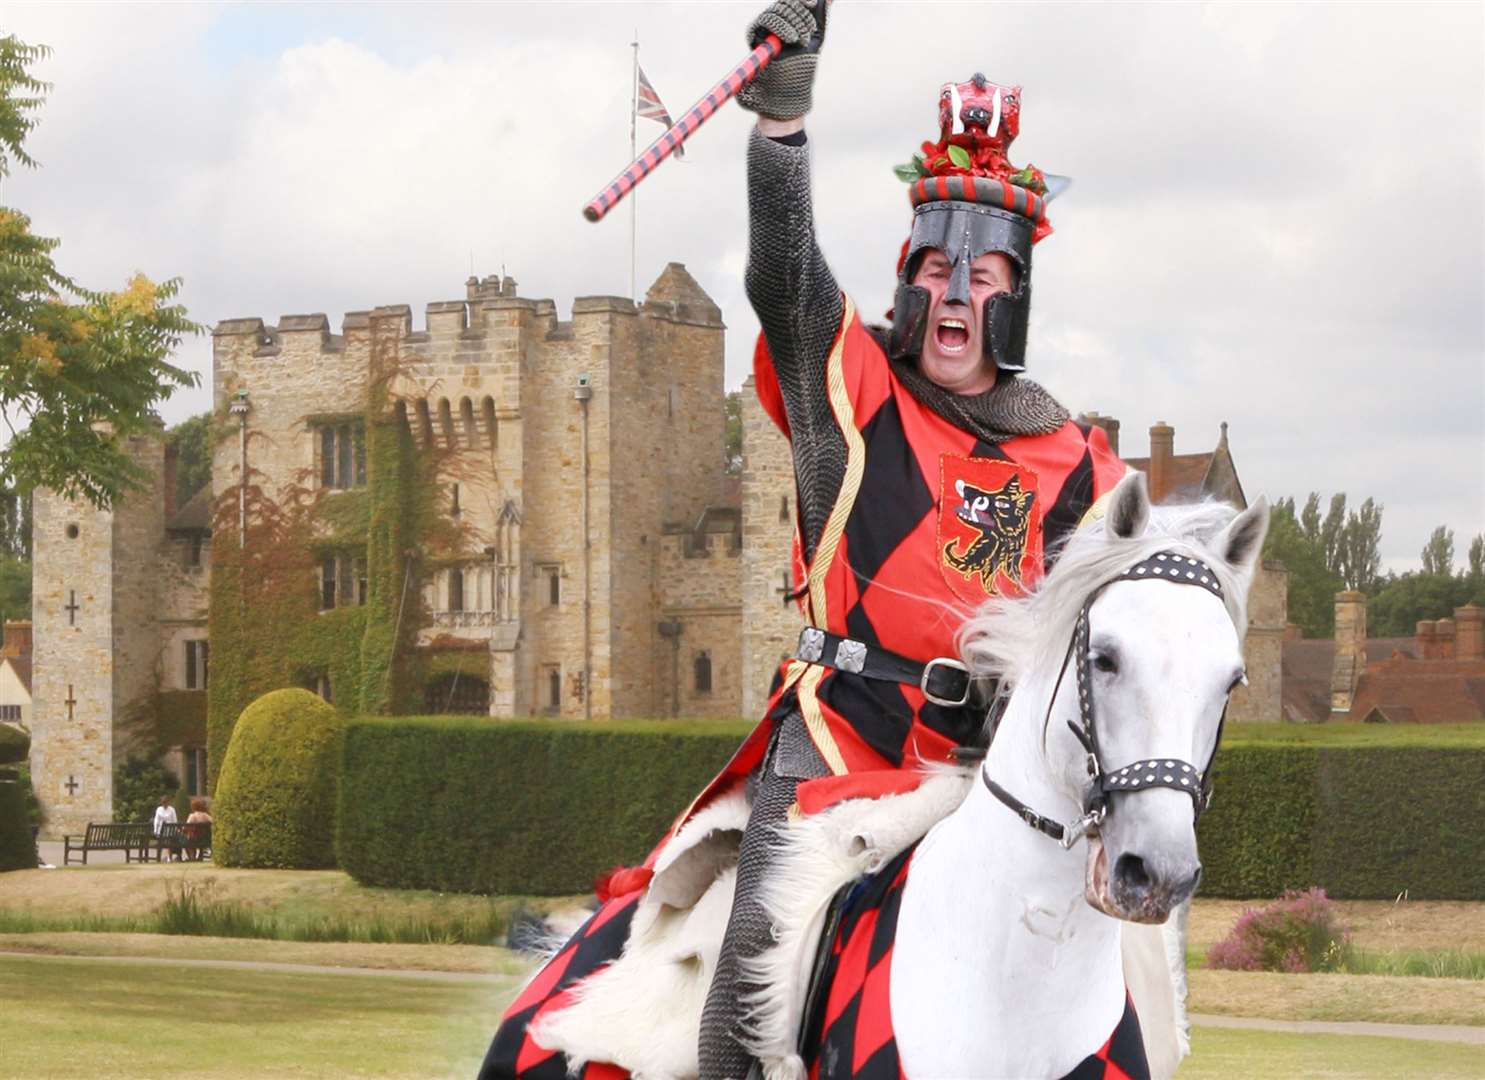 Jousting at Hever Castle resumes this weekend with new safety measures in place